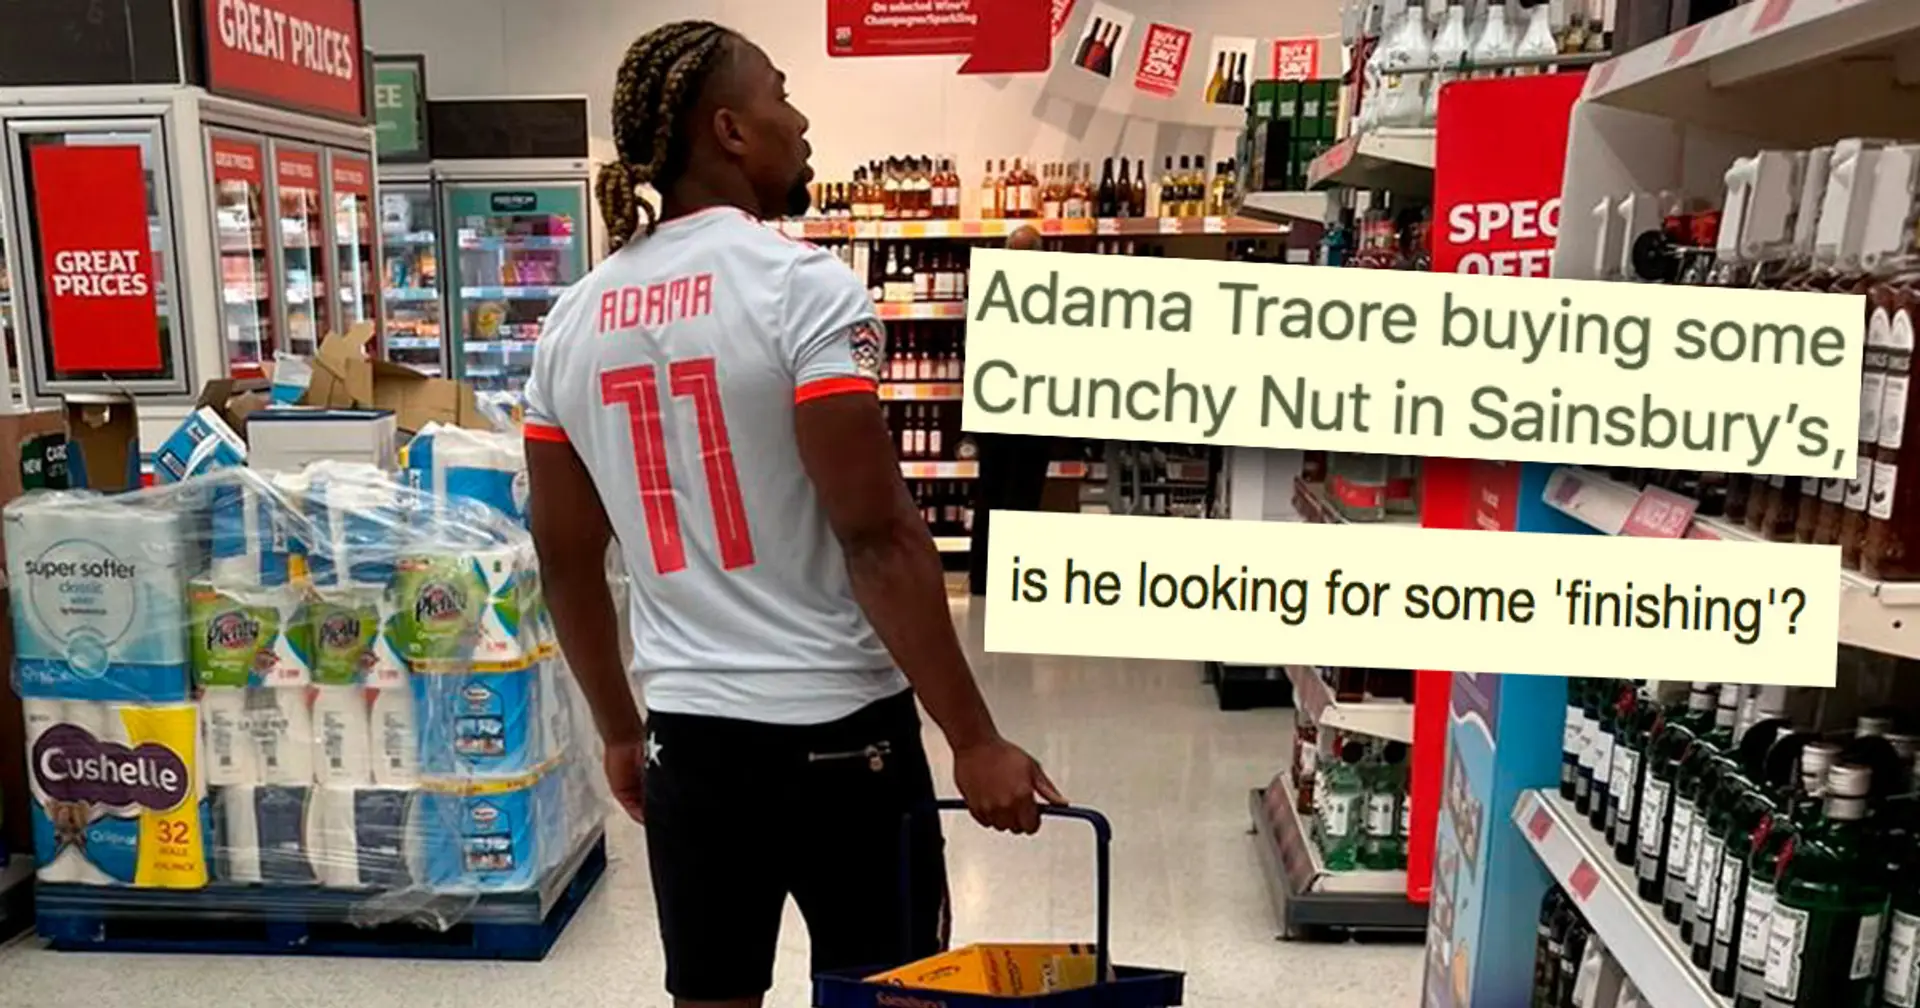 'Majestic vibe': Adama Traore stocks up at local store wearing Spain jersey